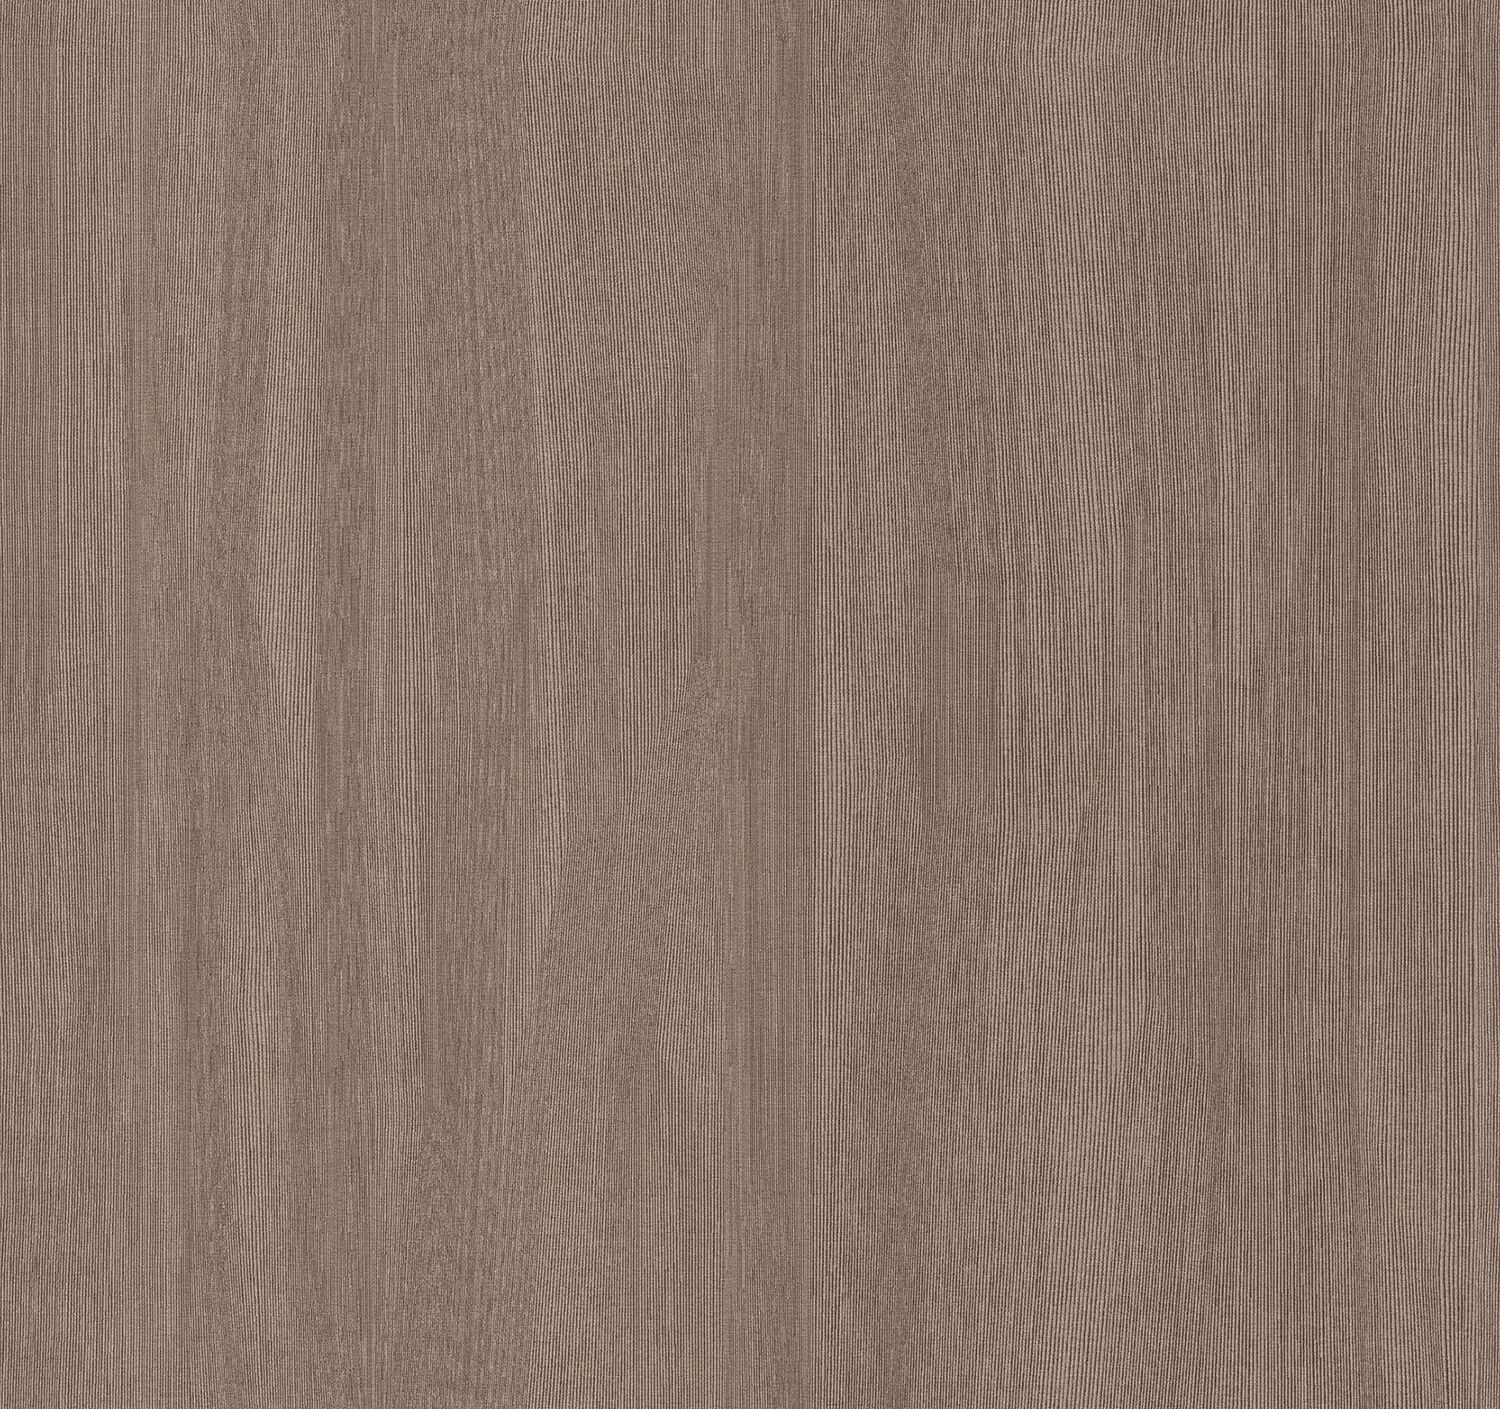 Juxtapose - Rosewood - 7020 - 06 - Half Yard Tileable Swatches